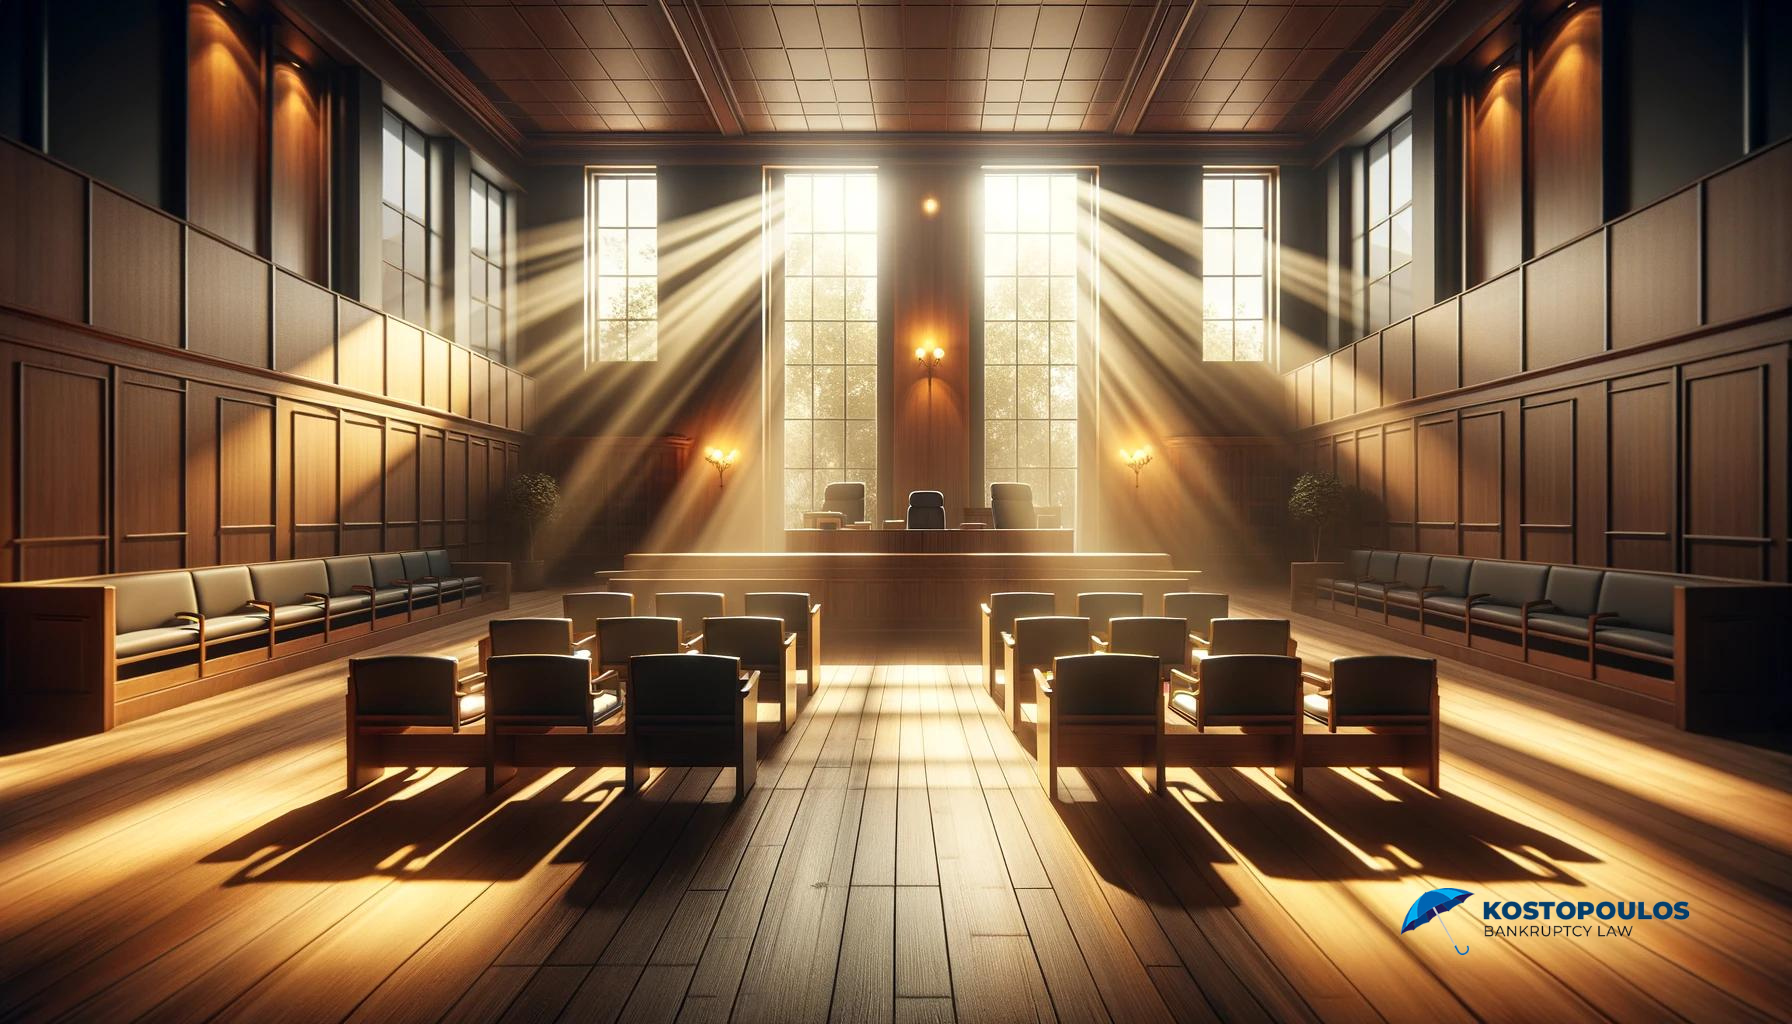 An image of a peaceful courtroom with sunlight streaming through, representing the calm and professional environment of the bankruptcy filing process.